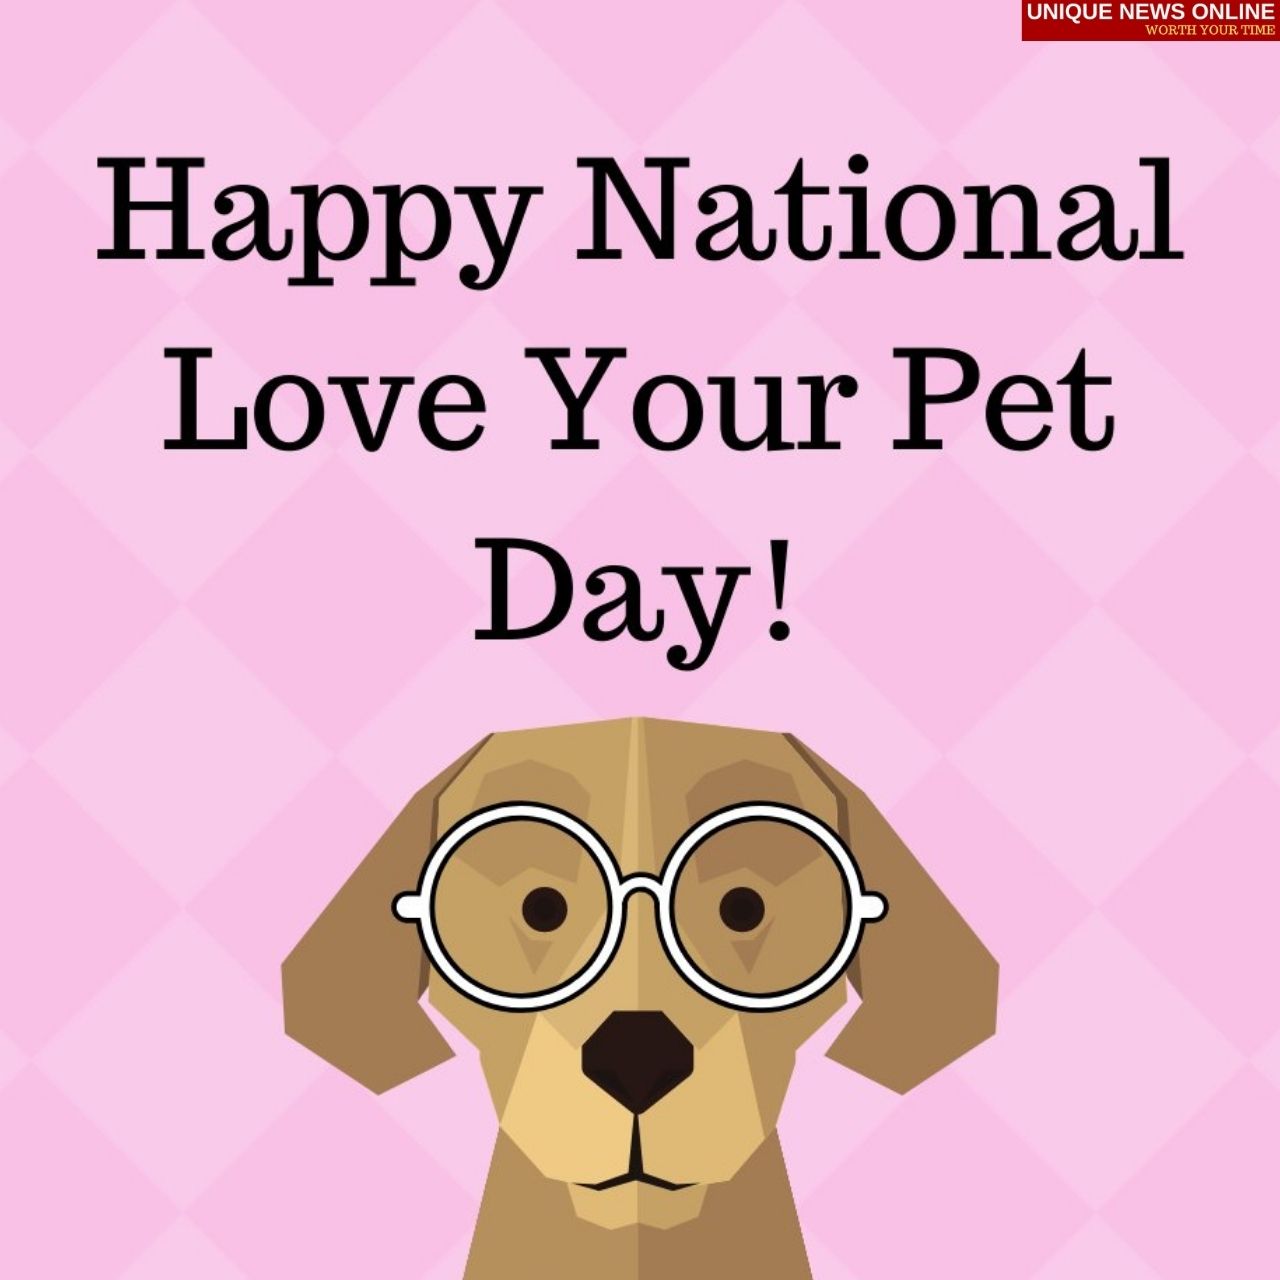 National Love Your Pet Day 2022 Instagram Captions, Quotes, HD Images